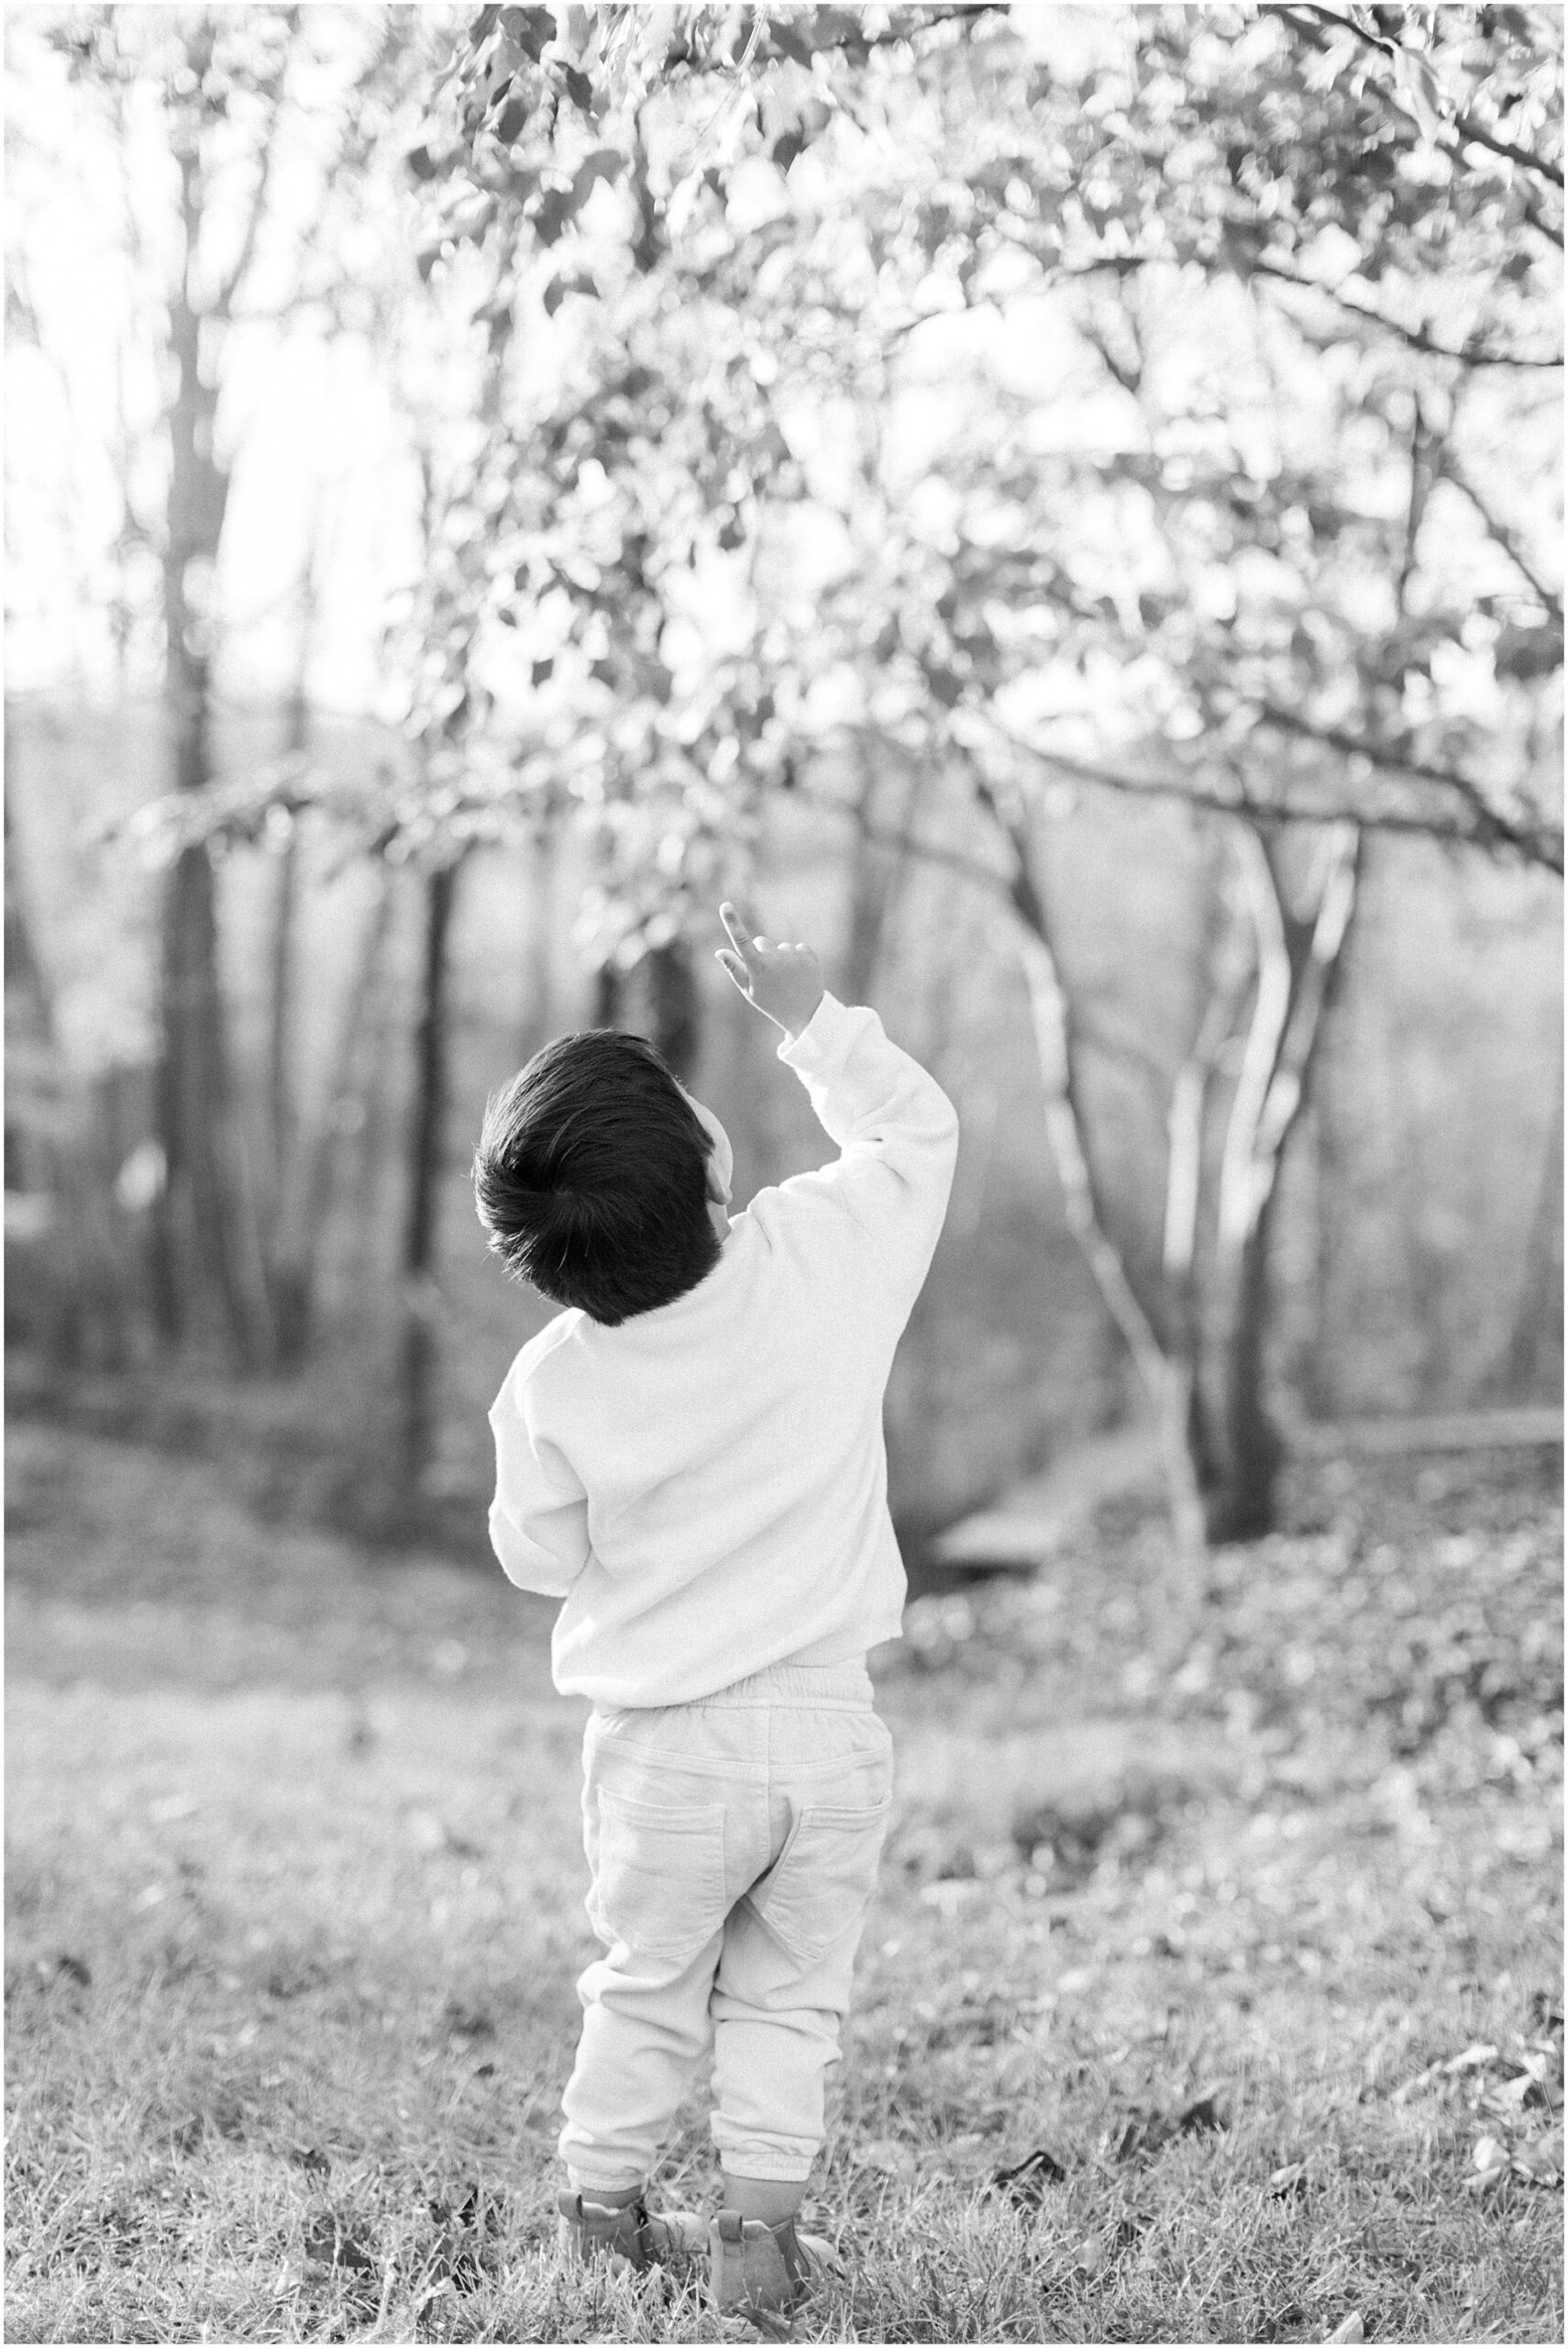 Little boy looking up at leaves in a tree in black and white